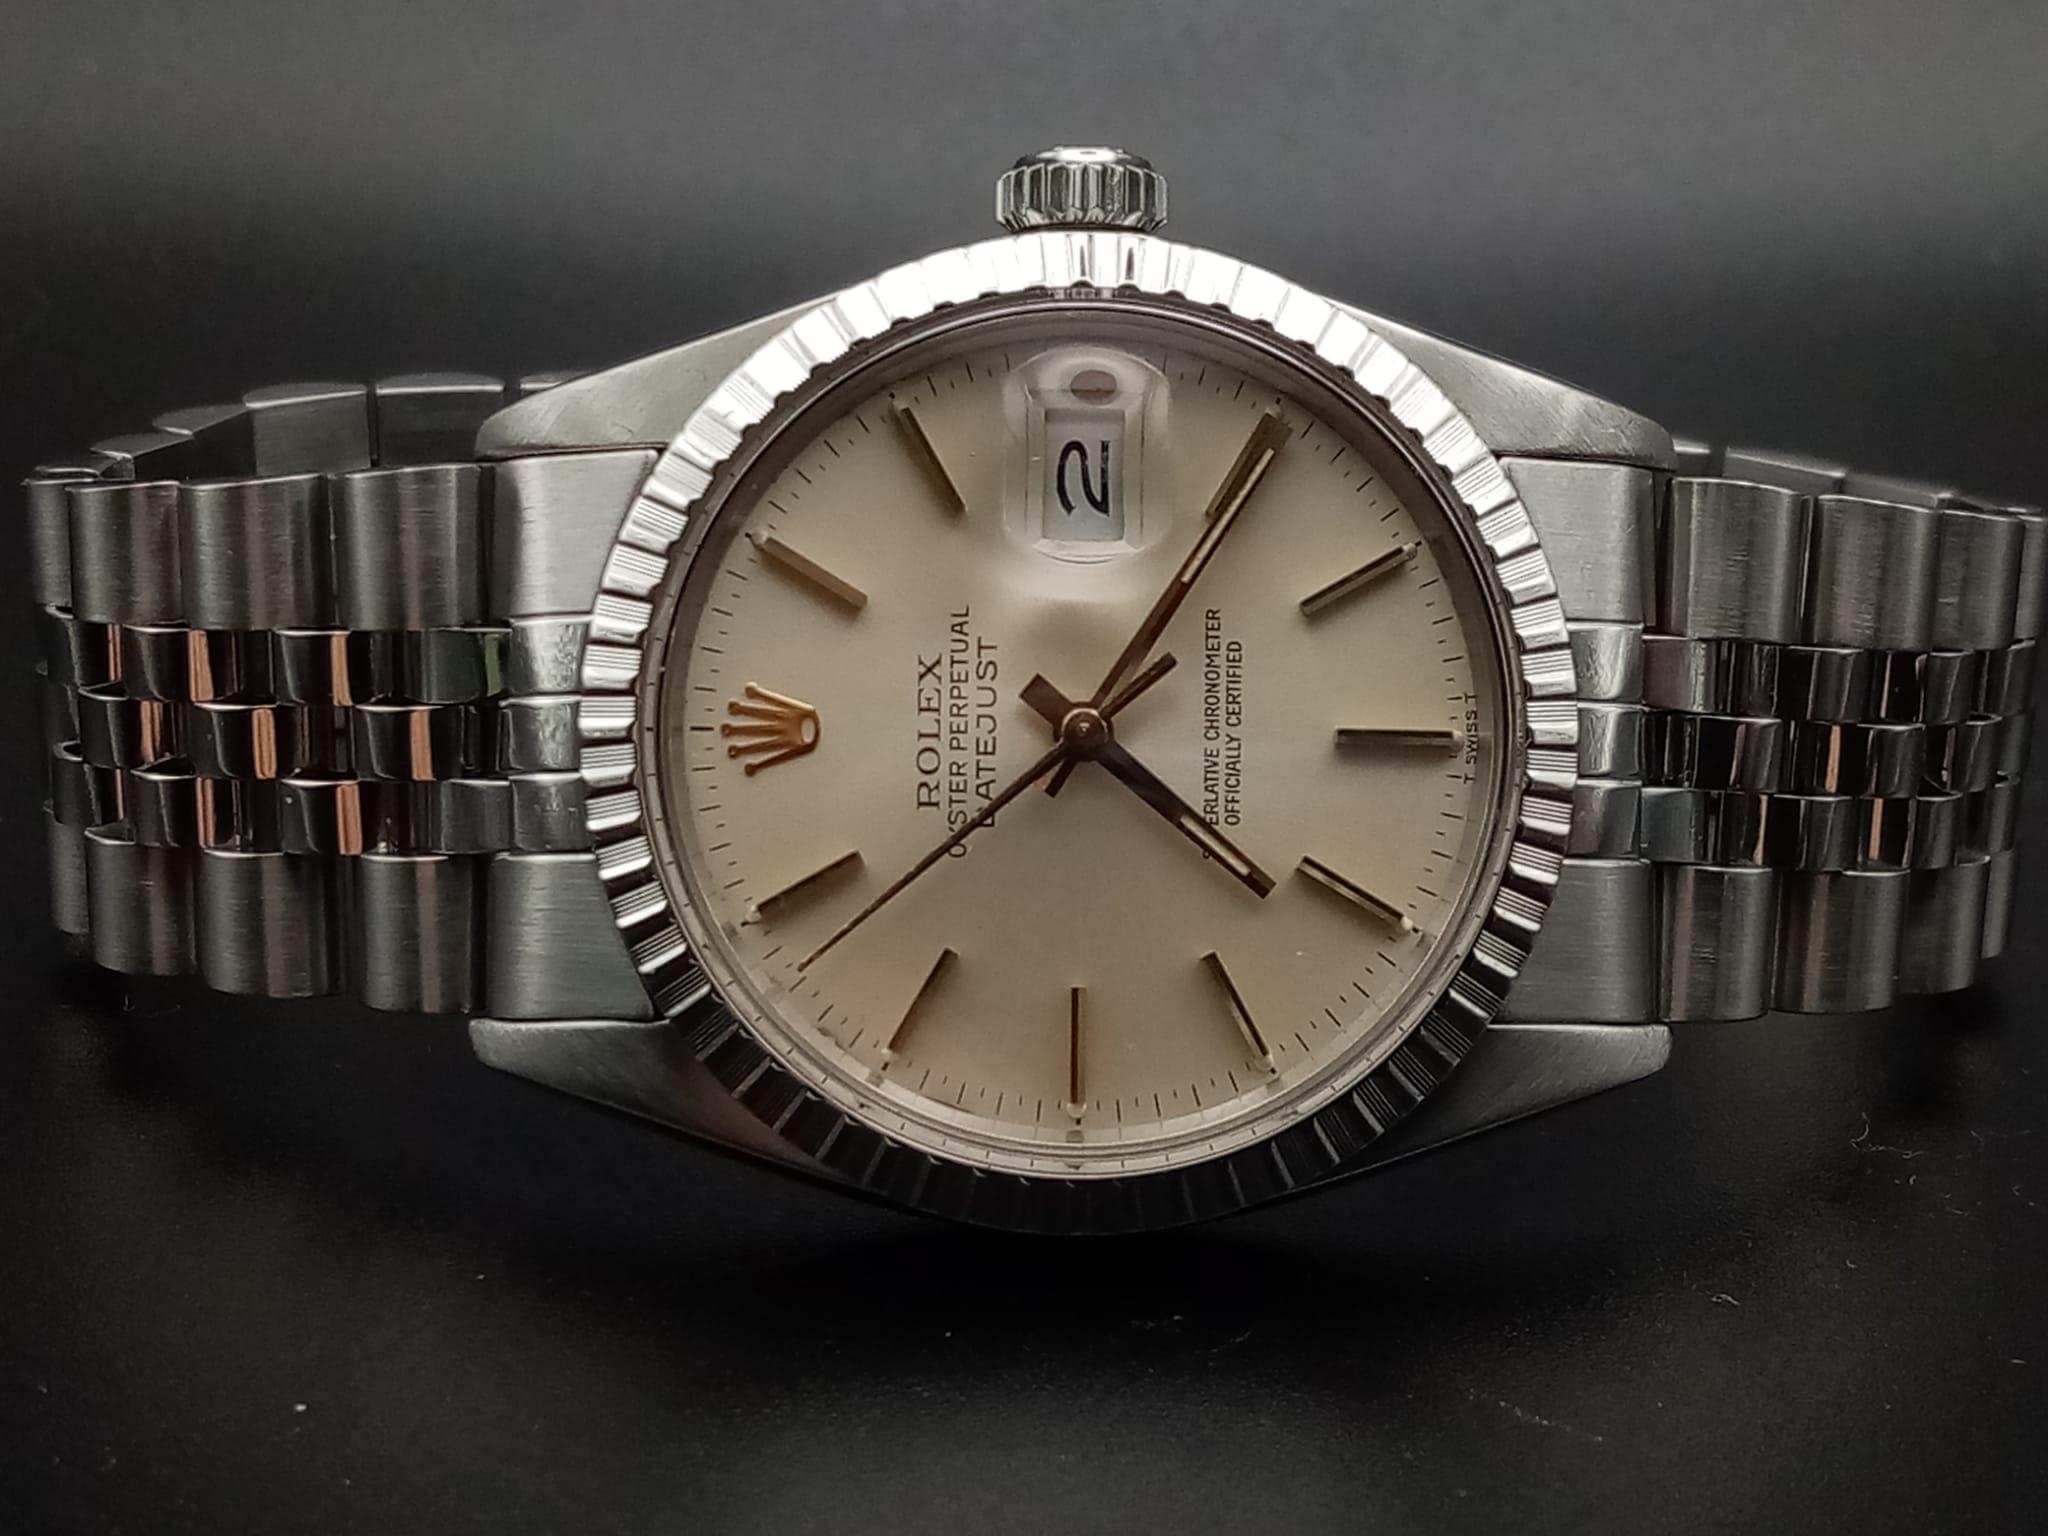 A Rolex Oyster Perpetual Datejust Gents watch. Stainless steel strap and case - 36mm. Cream dial. - Image 4 of 10